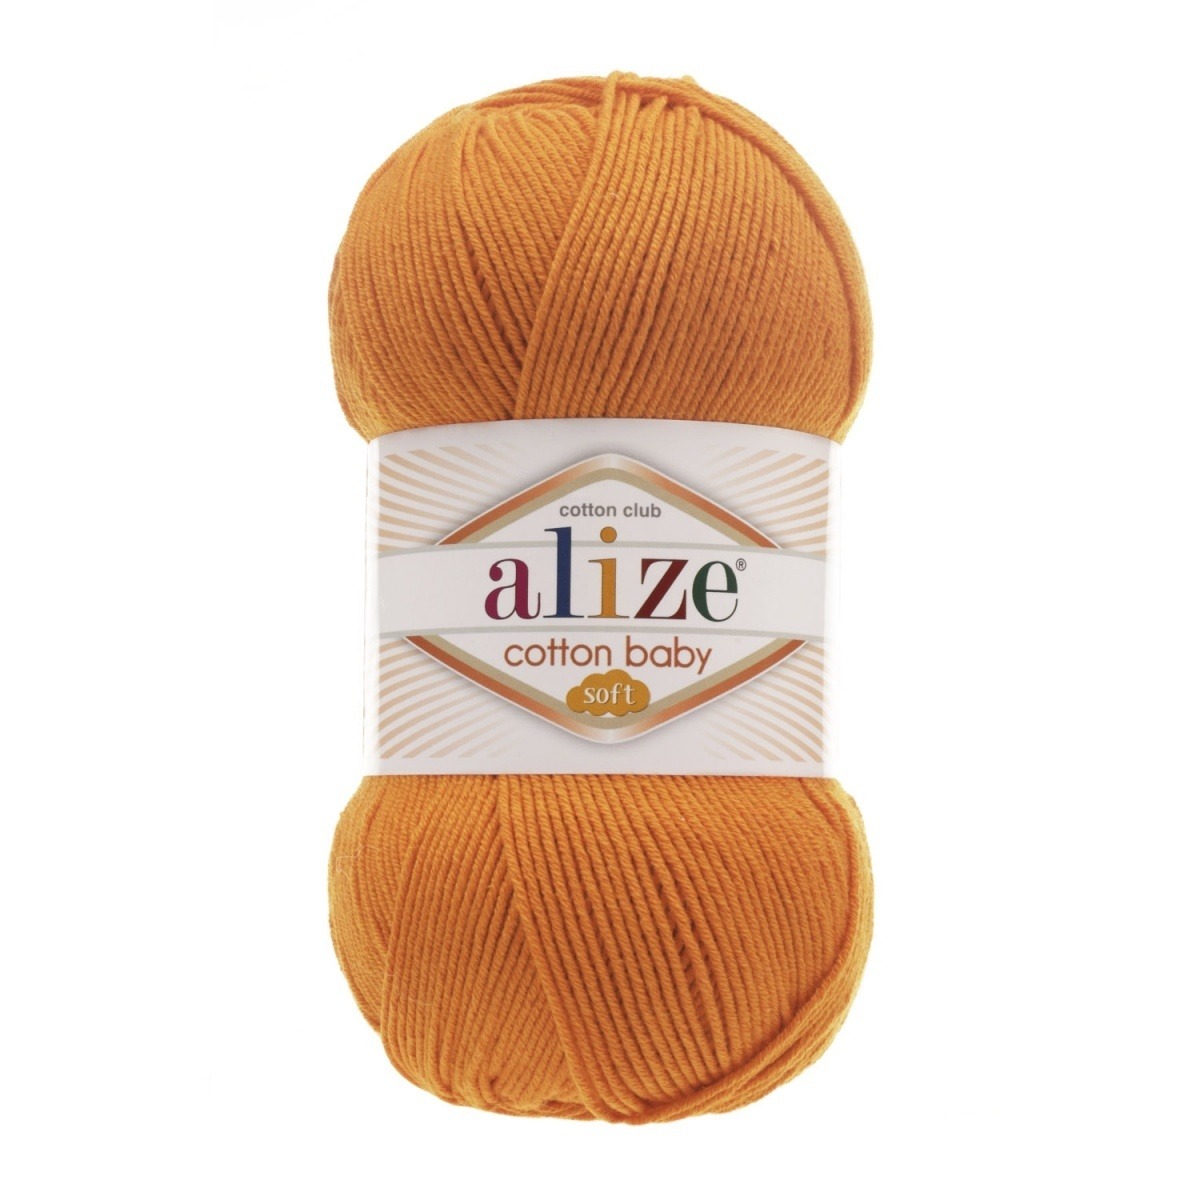 Alize "Cotton baby soft" (37)